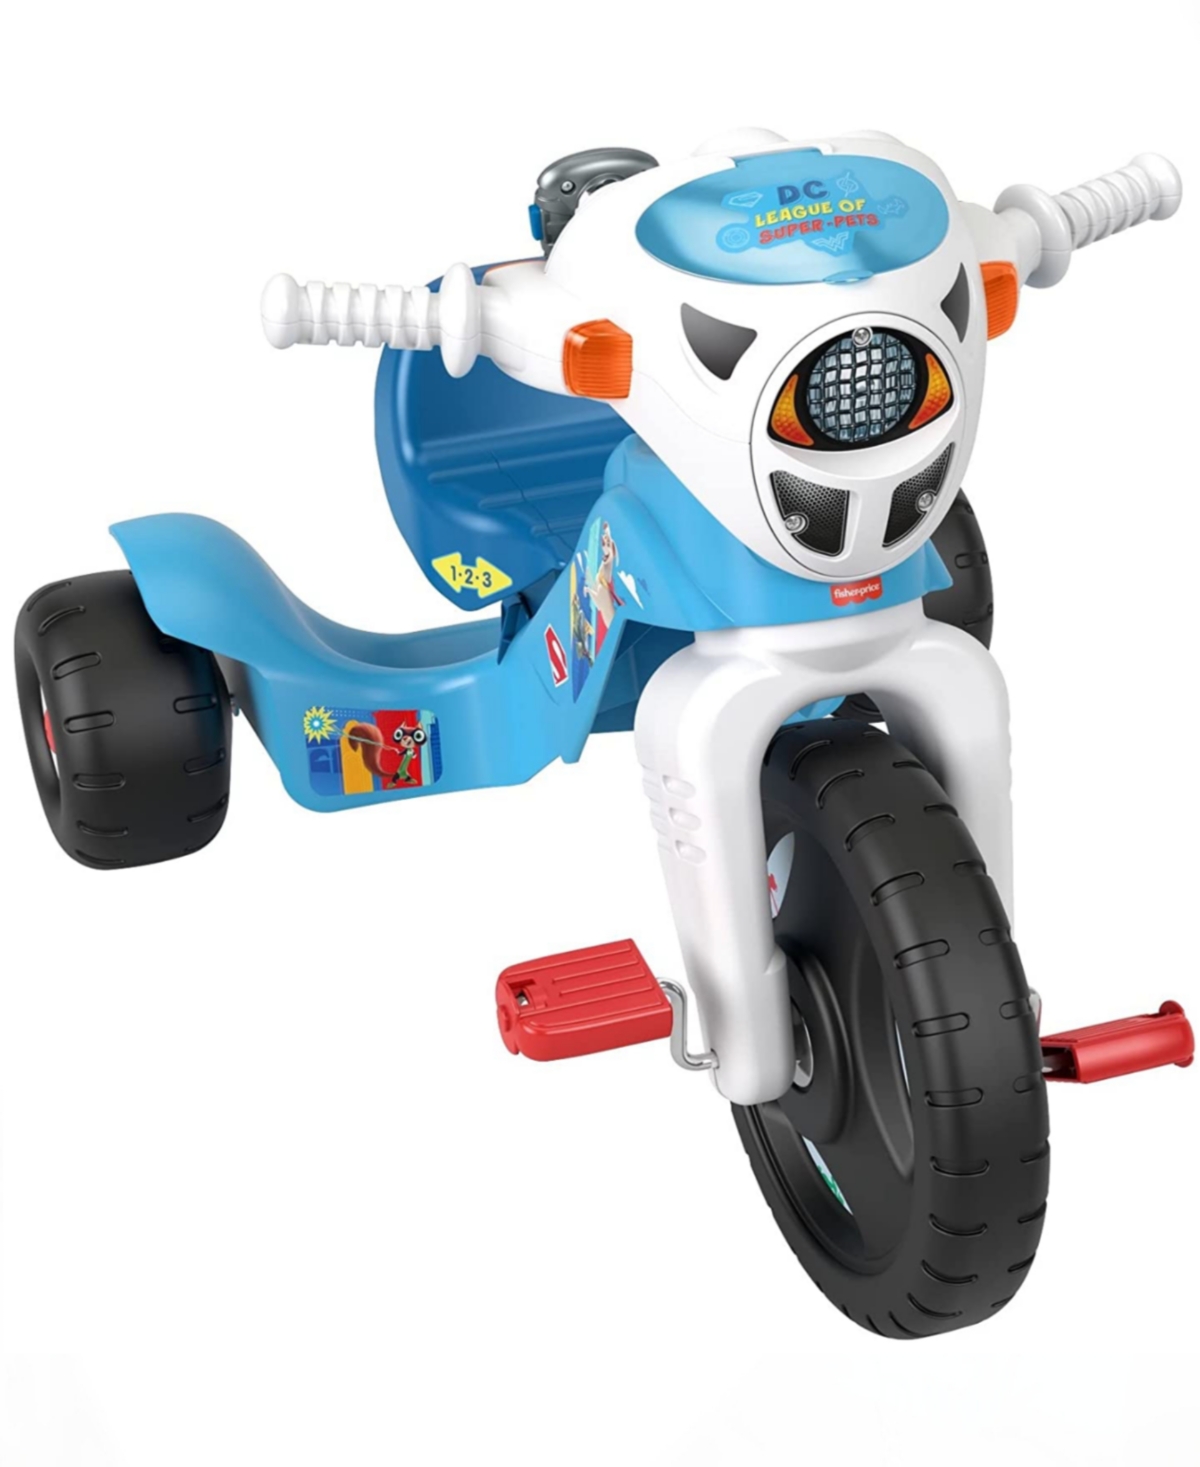 Fisher Price Babies' Power Wheels Dc League Ride-on 3 Wheeler Trike Bike For Toddlers In Multi